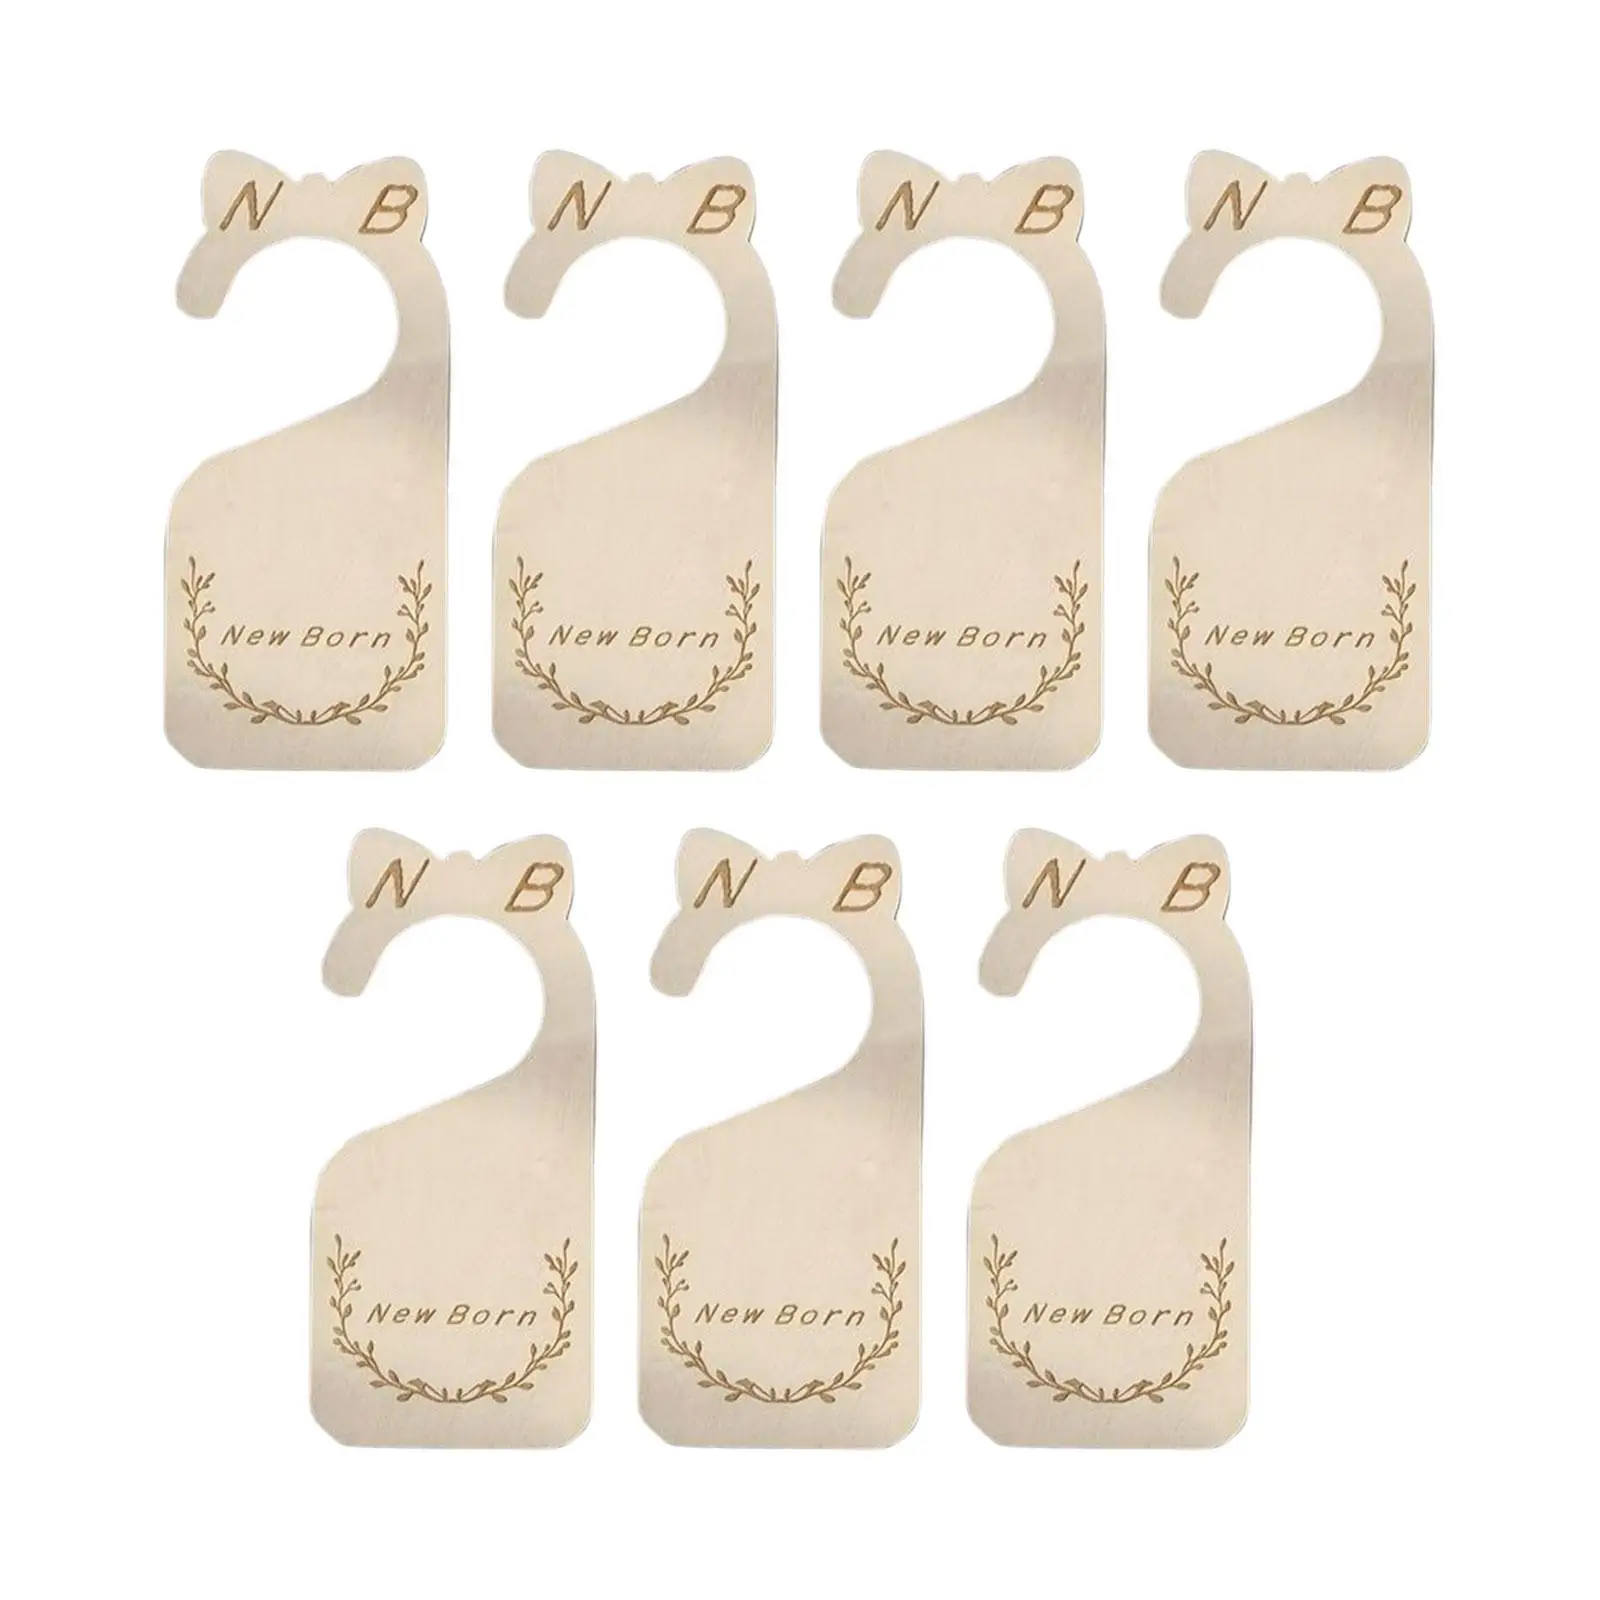 7x Baby Wardrobe Dividers, Adorable Etched Design Label Closet Organizer Tag, for Nursery Decor Infant to 24 Months Newborn Gift